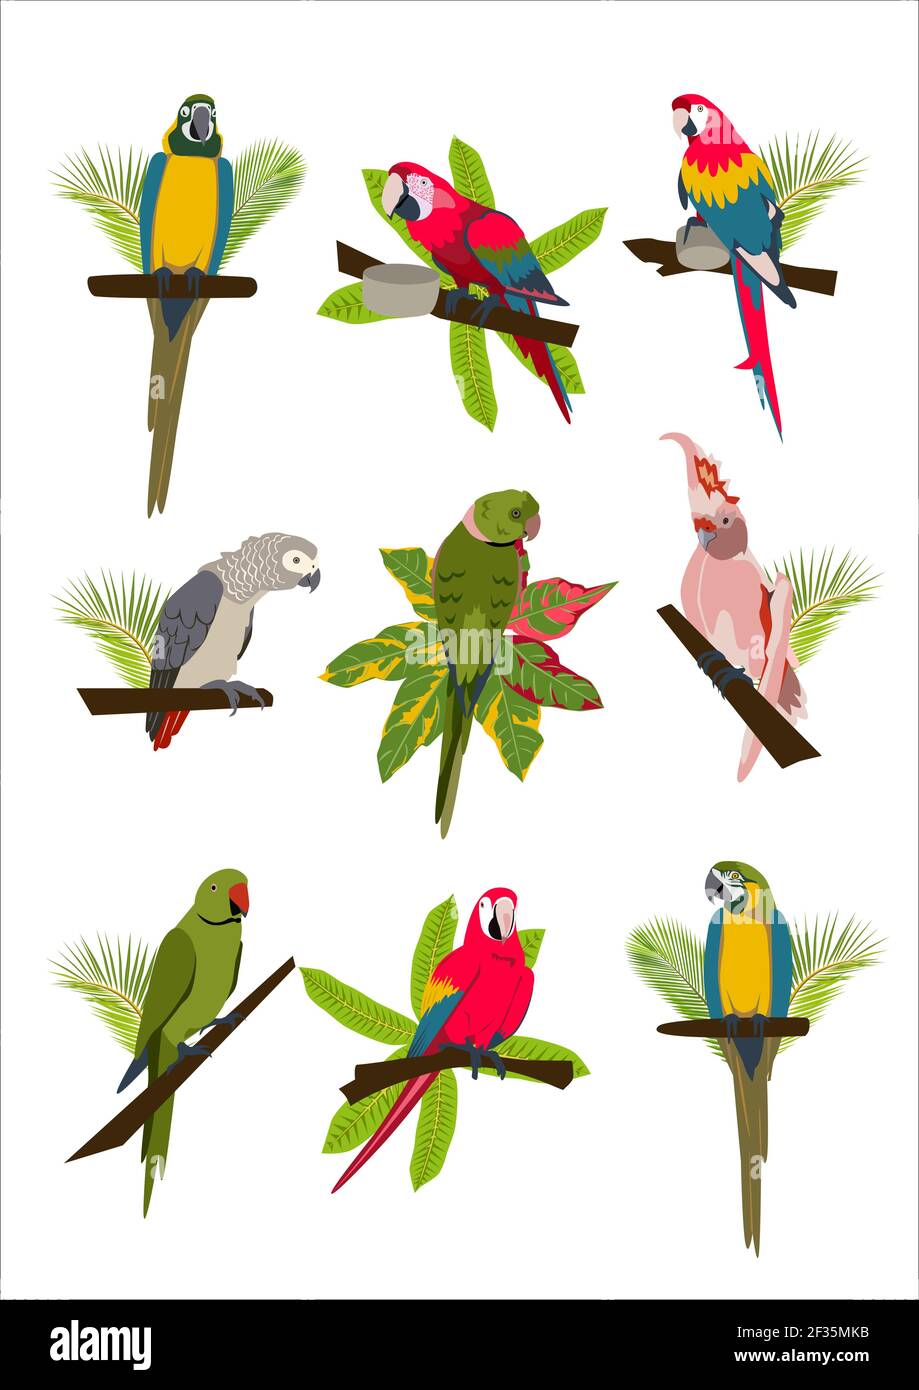 Tropical hand drawn colorful parrots set with plants and leaves. Macaw, cockatoo, gray and necklace parrot. Vector illustration isolated on white background. Stock Vector